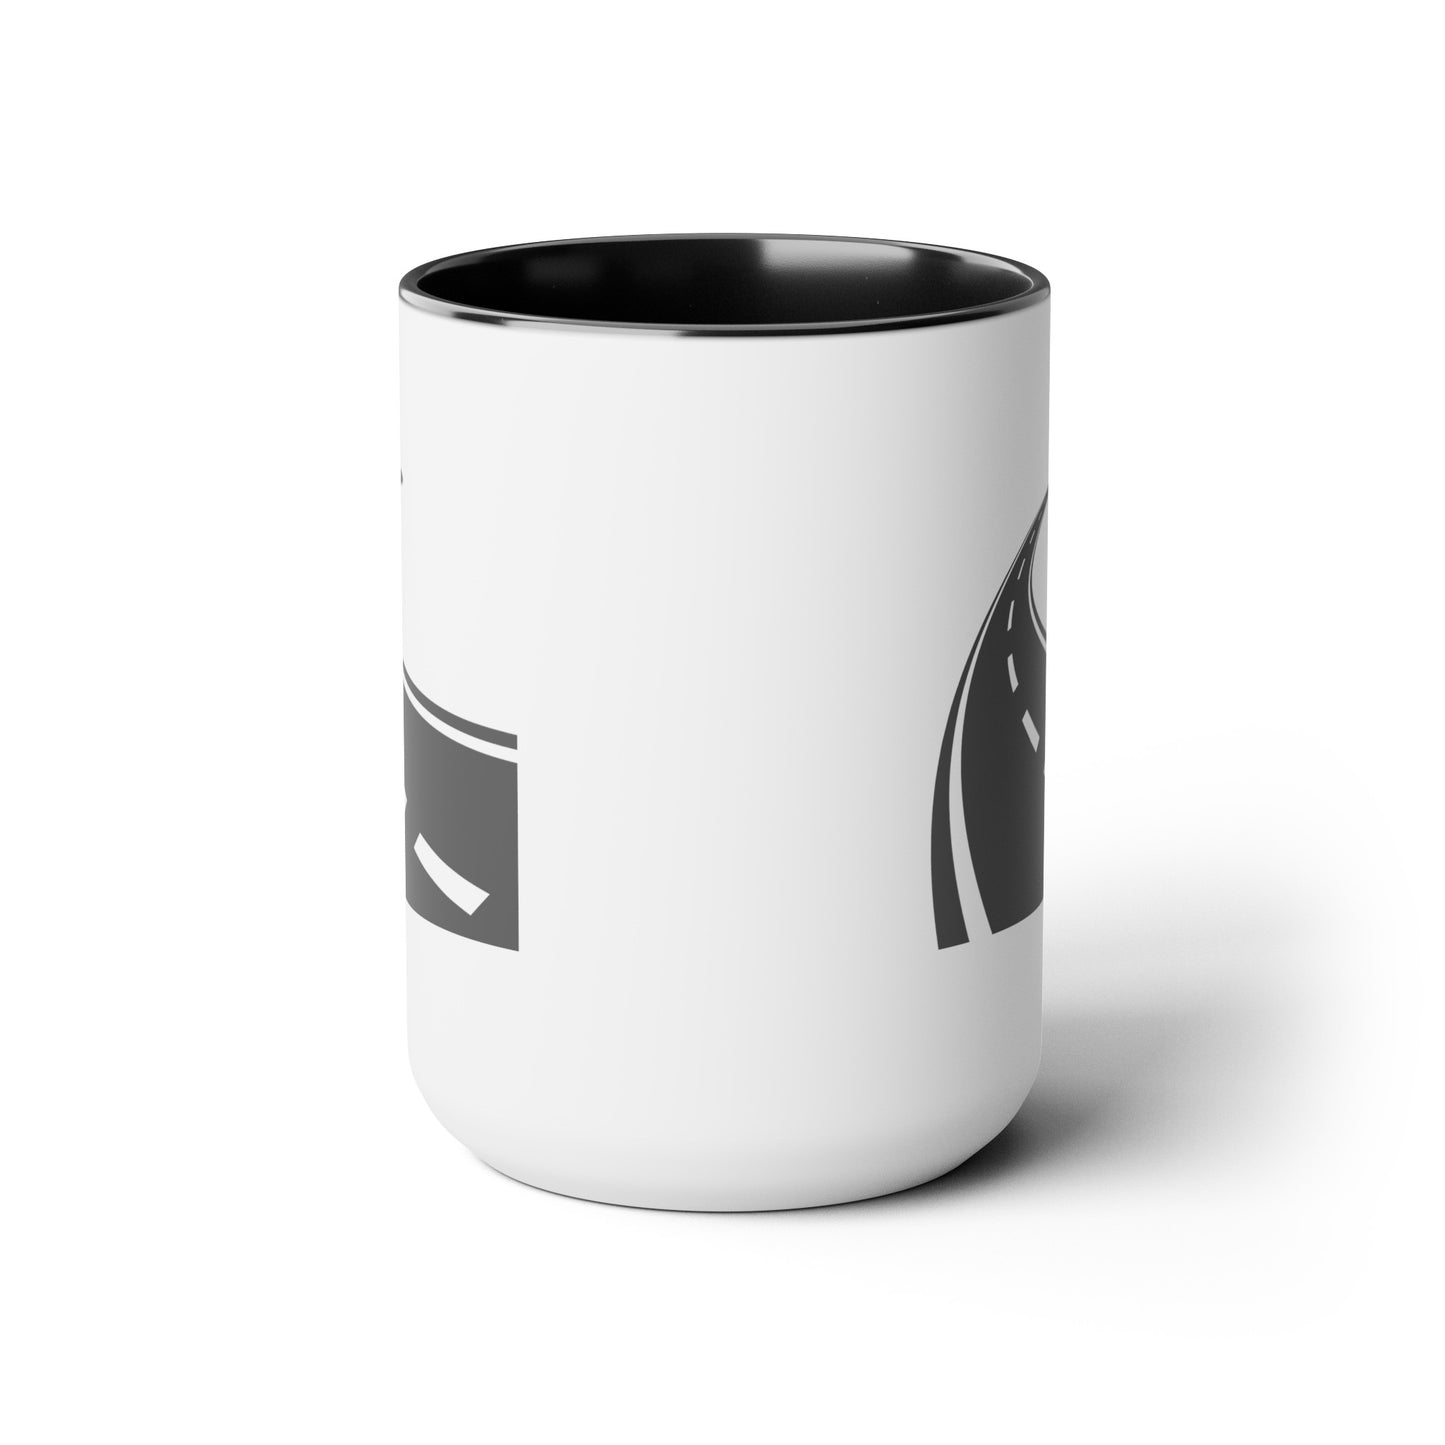 Long and Winding Road Coffee Mugs - Double Sided Black Accent White Ceramic 15oz by TheGlassyLass.com